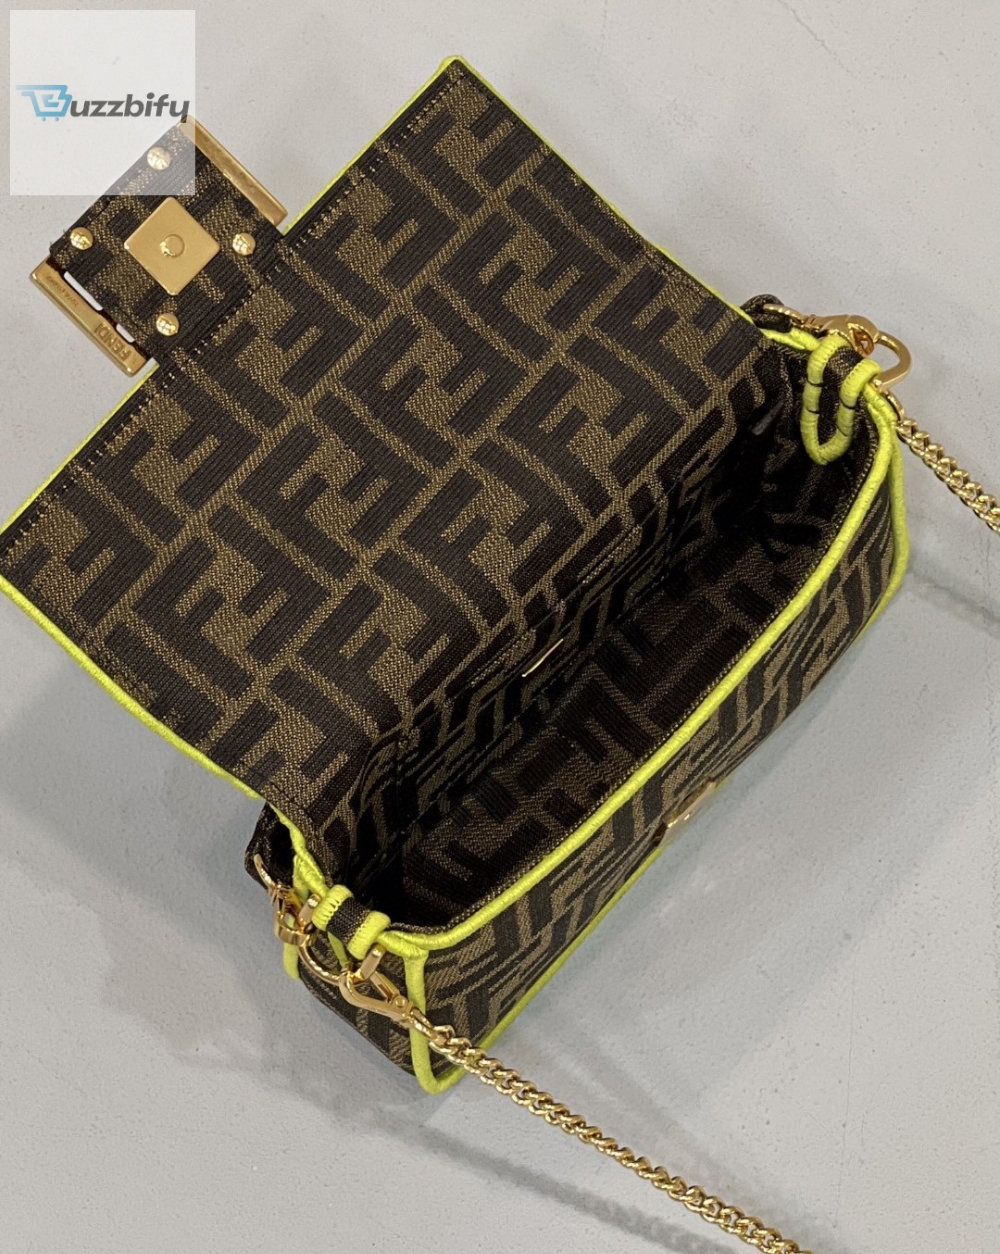 Fendi Baguette Small Brown Fabric Yellow Border Bag For Woman 18cm/7in 